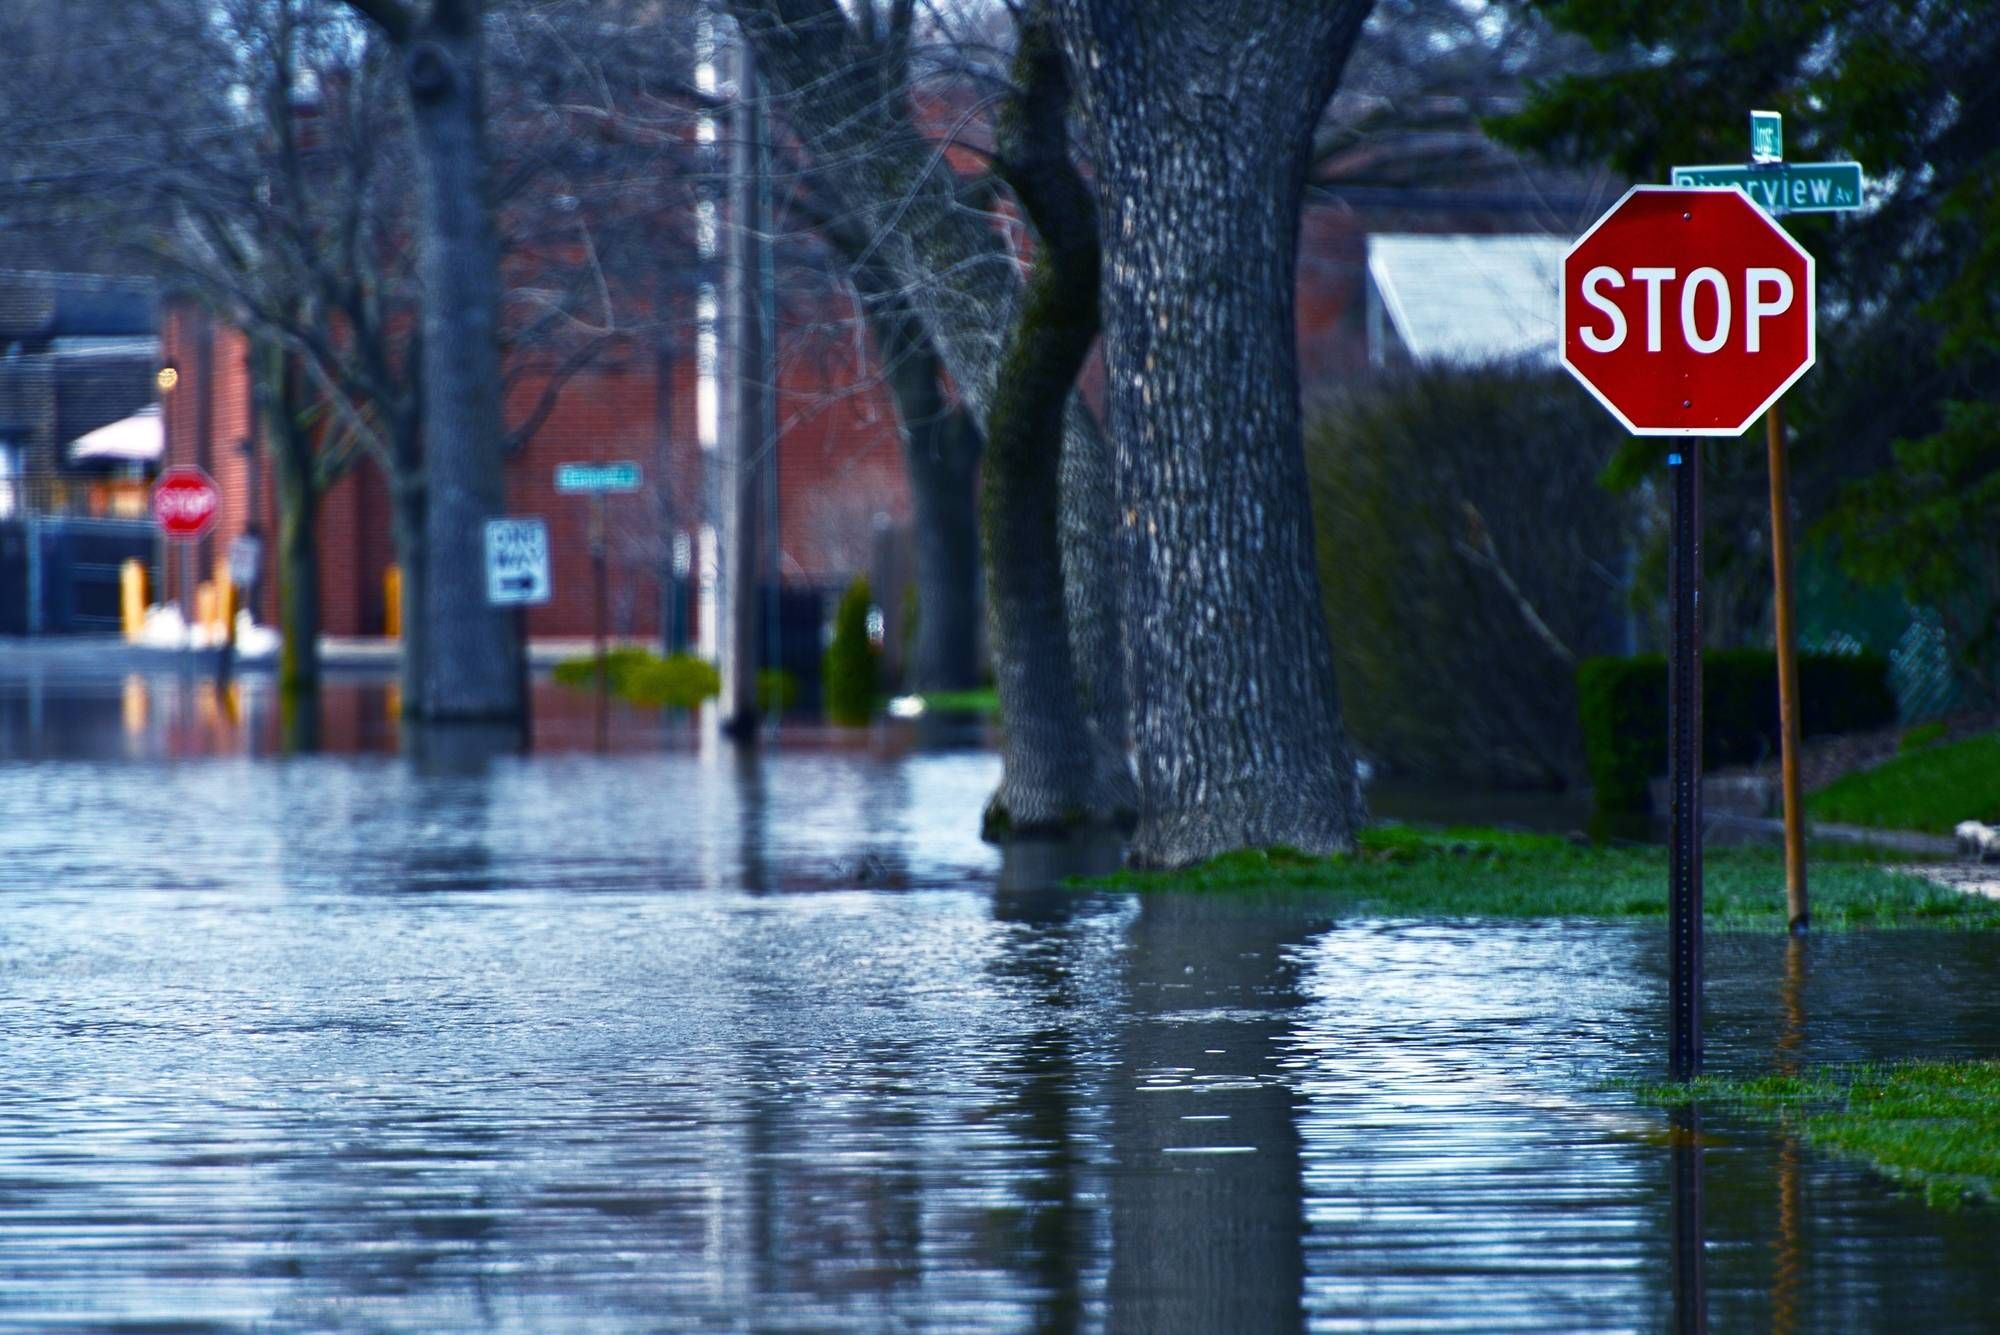 Flooding street regarding the Grand Forks flood class action lawsuit filed